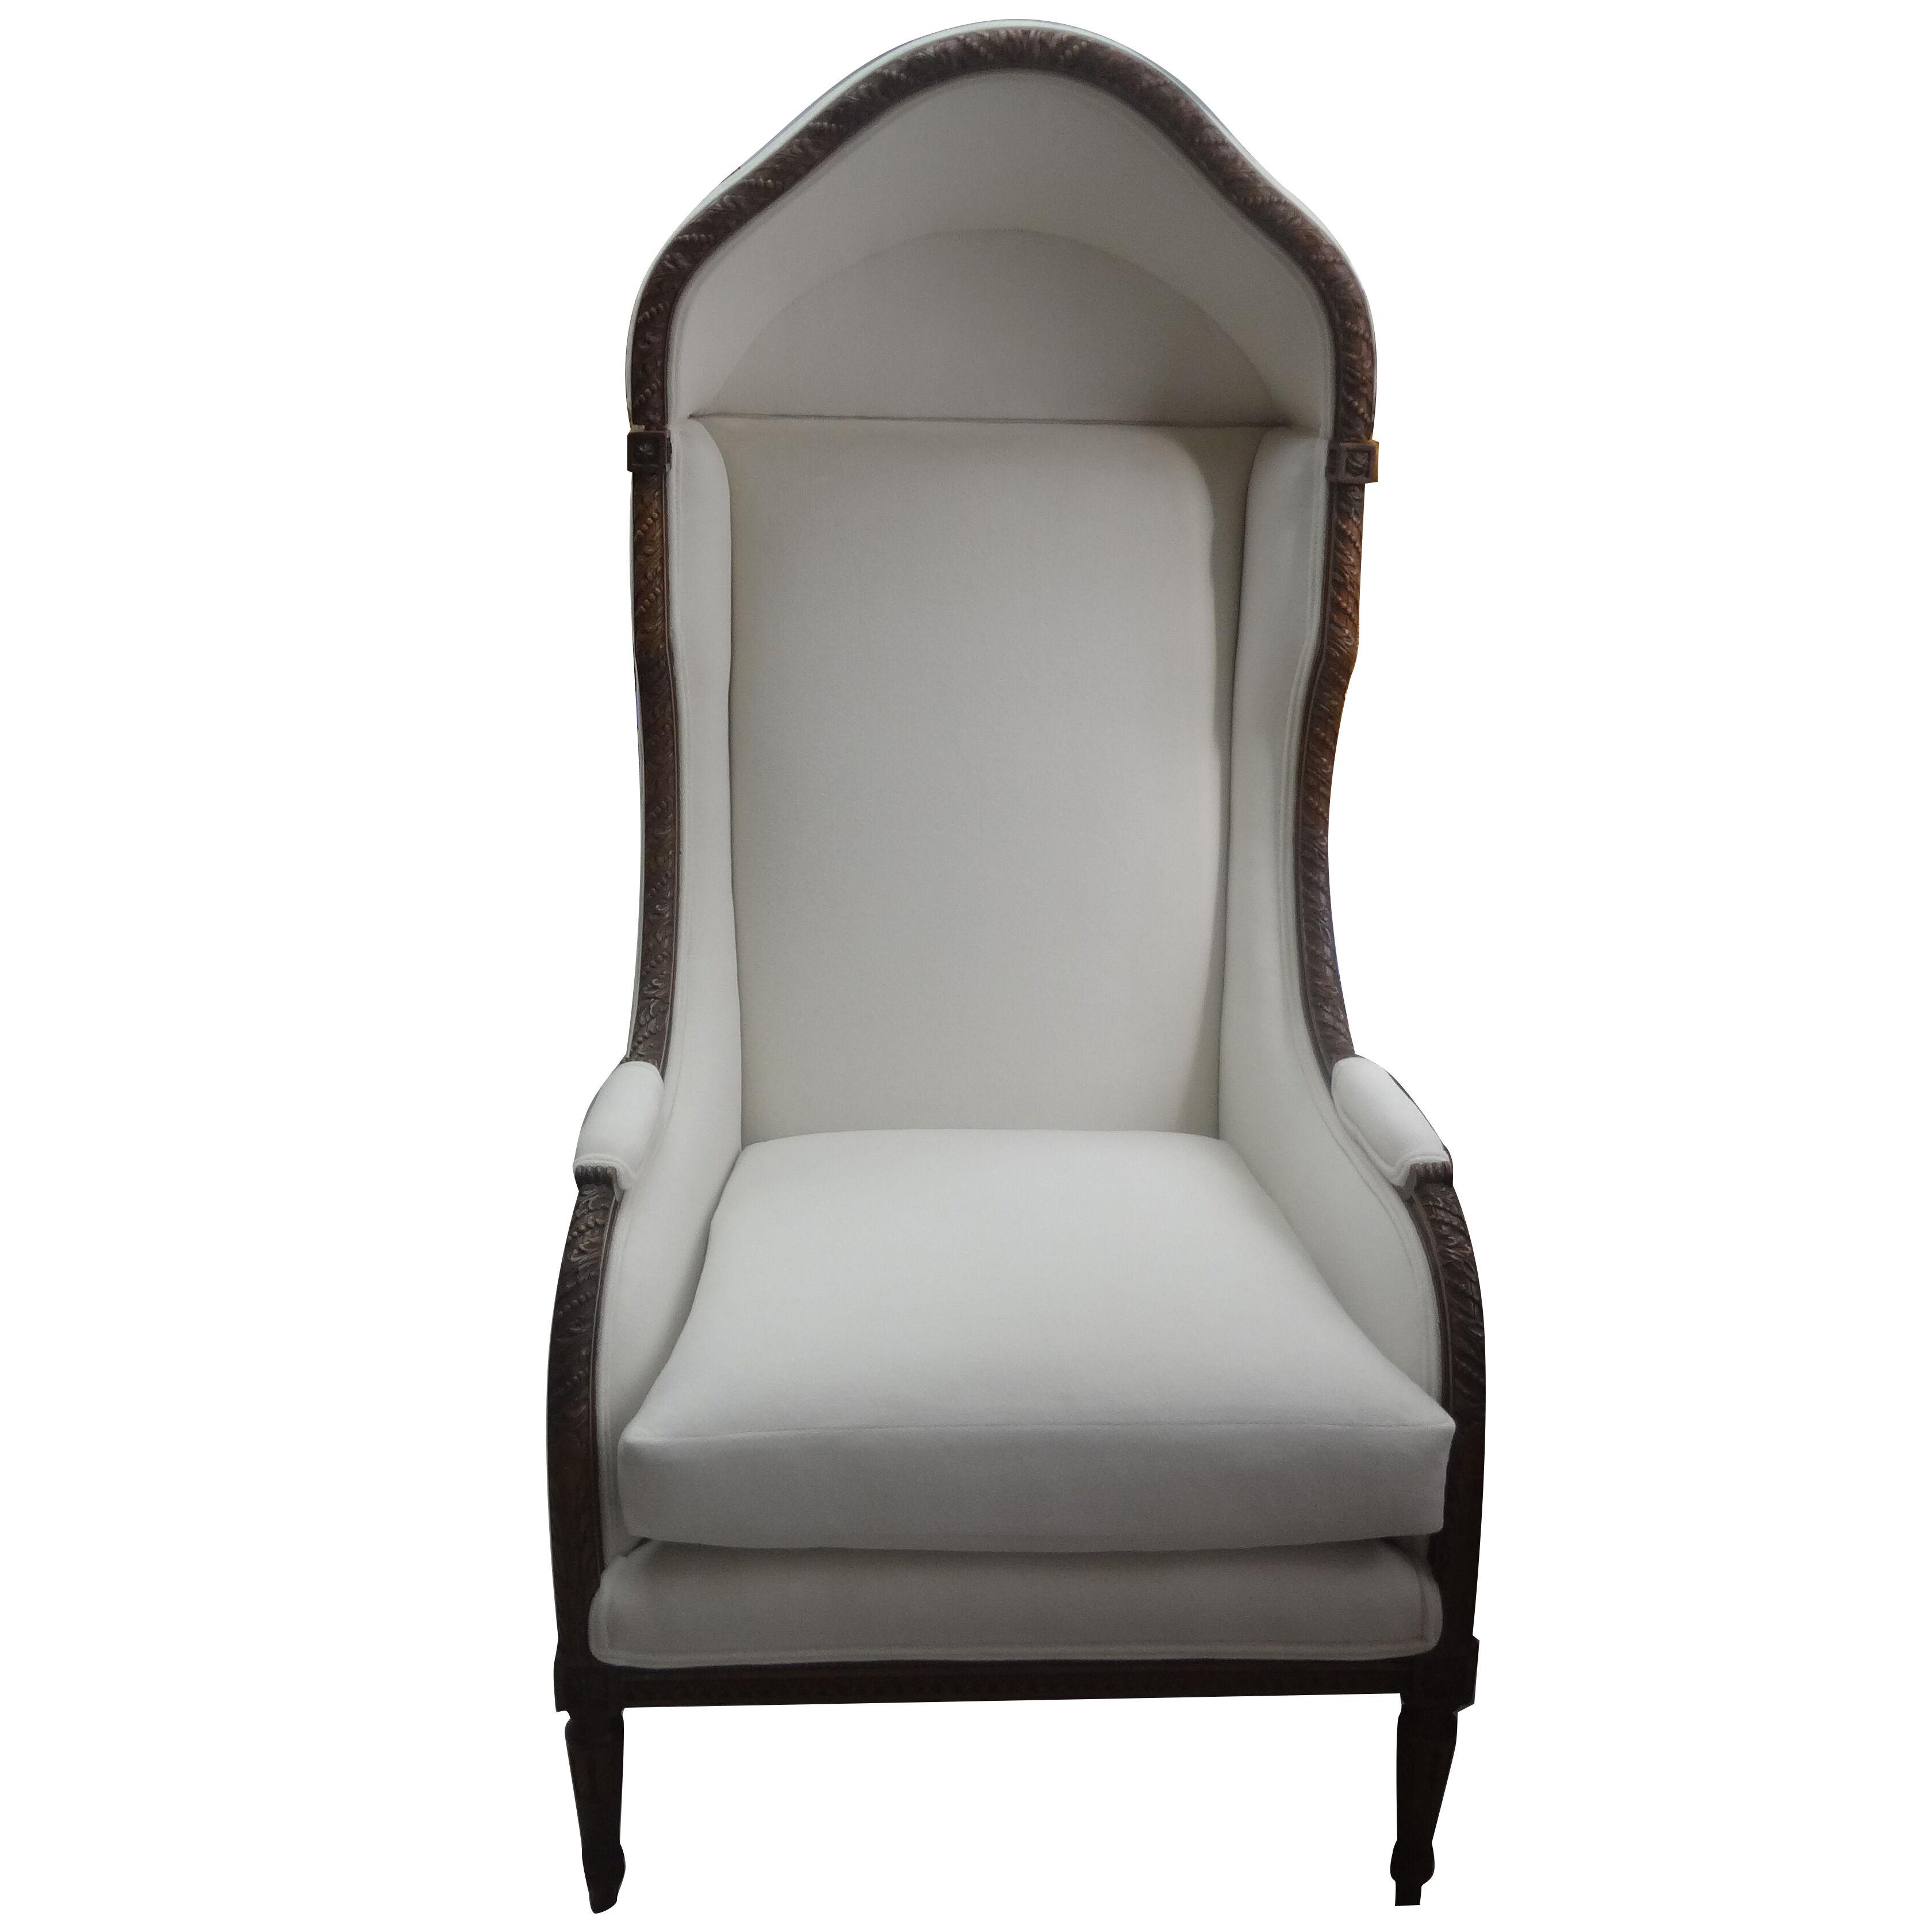 19th Century French Louis XVI Style Hooded Chair